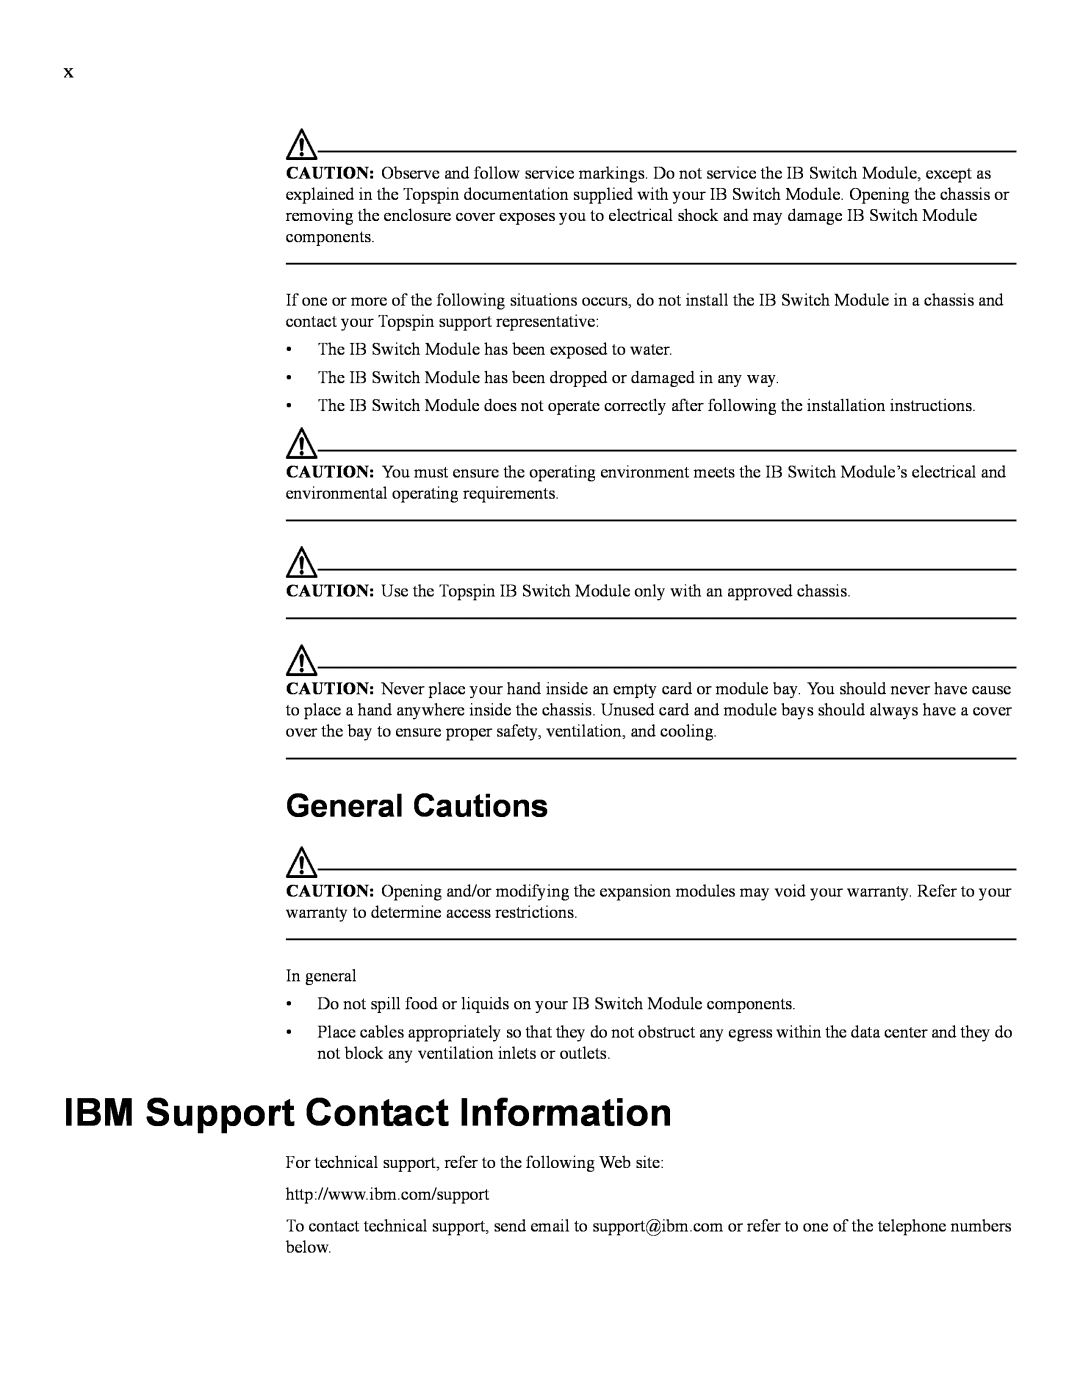 IBM 24R9718 IB manual IBM Support Contact Information, General Cautions 